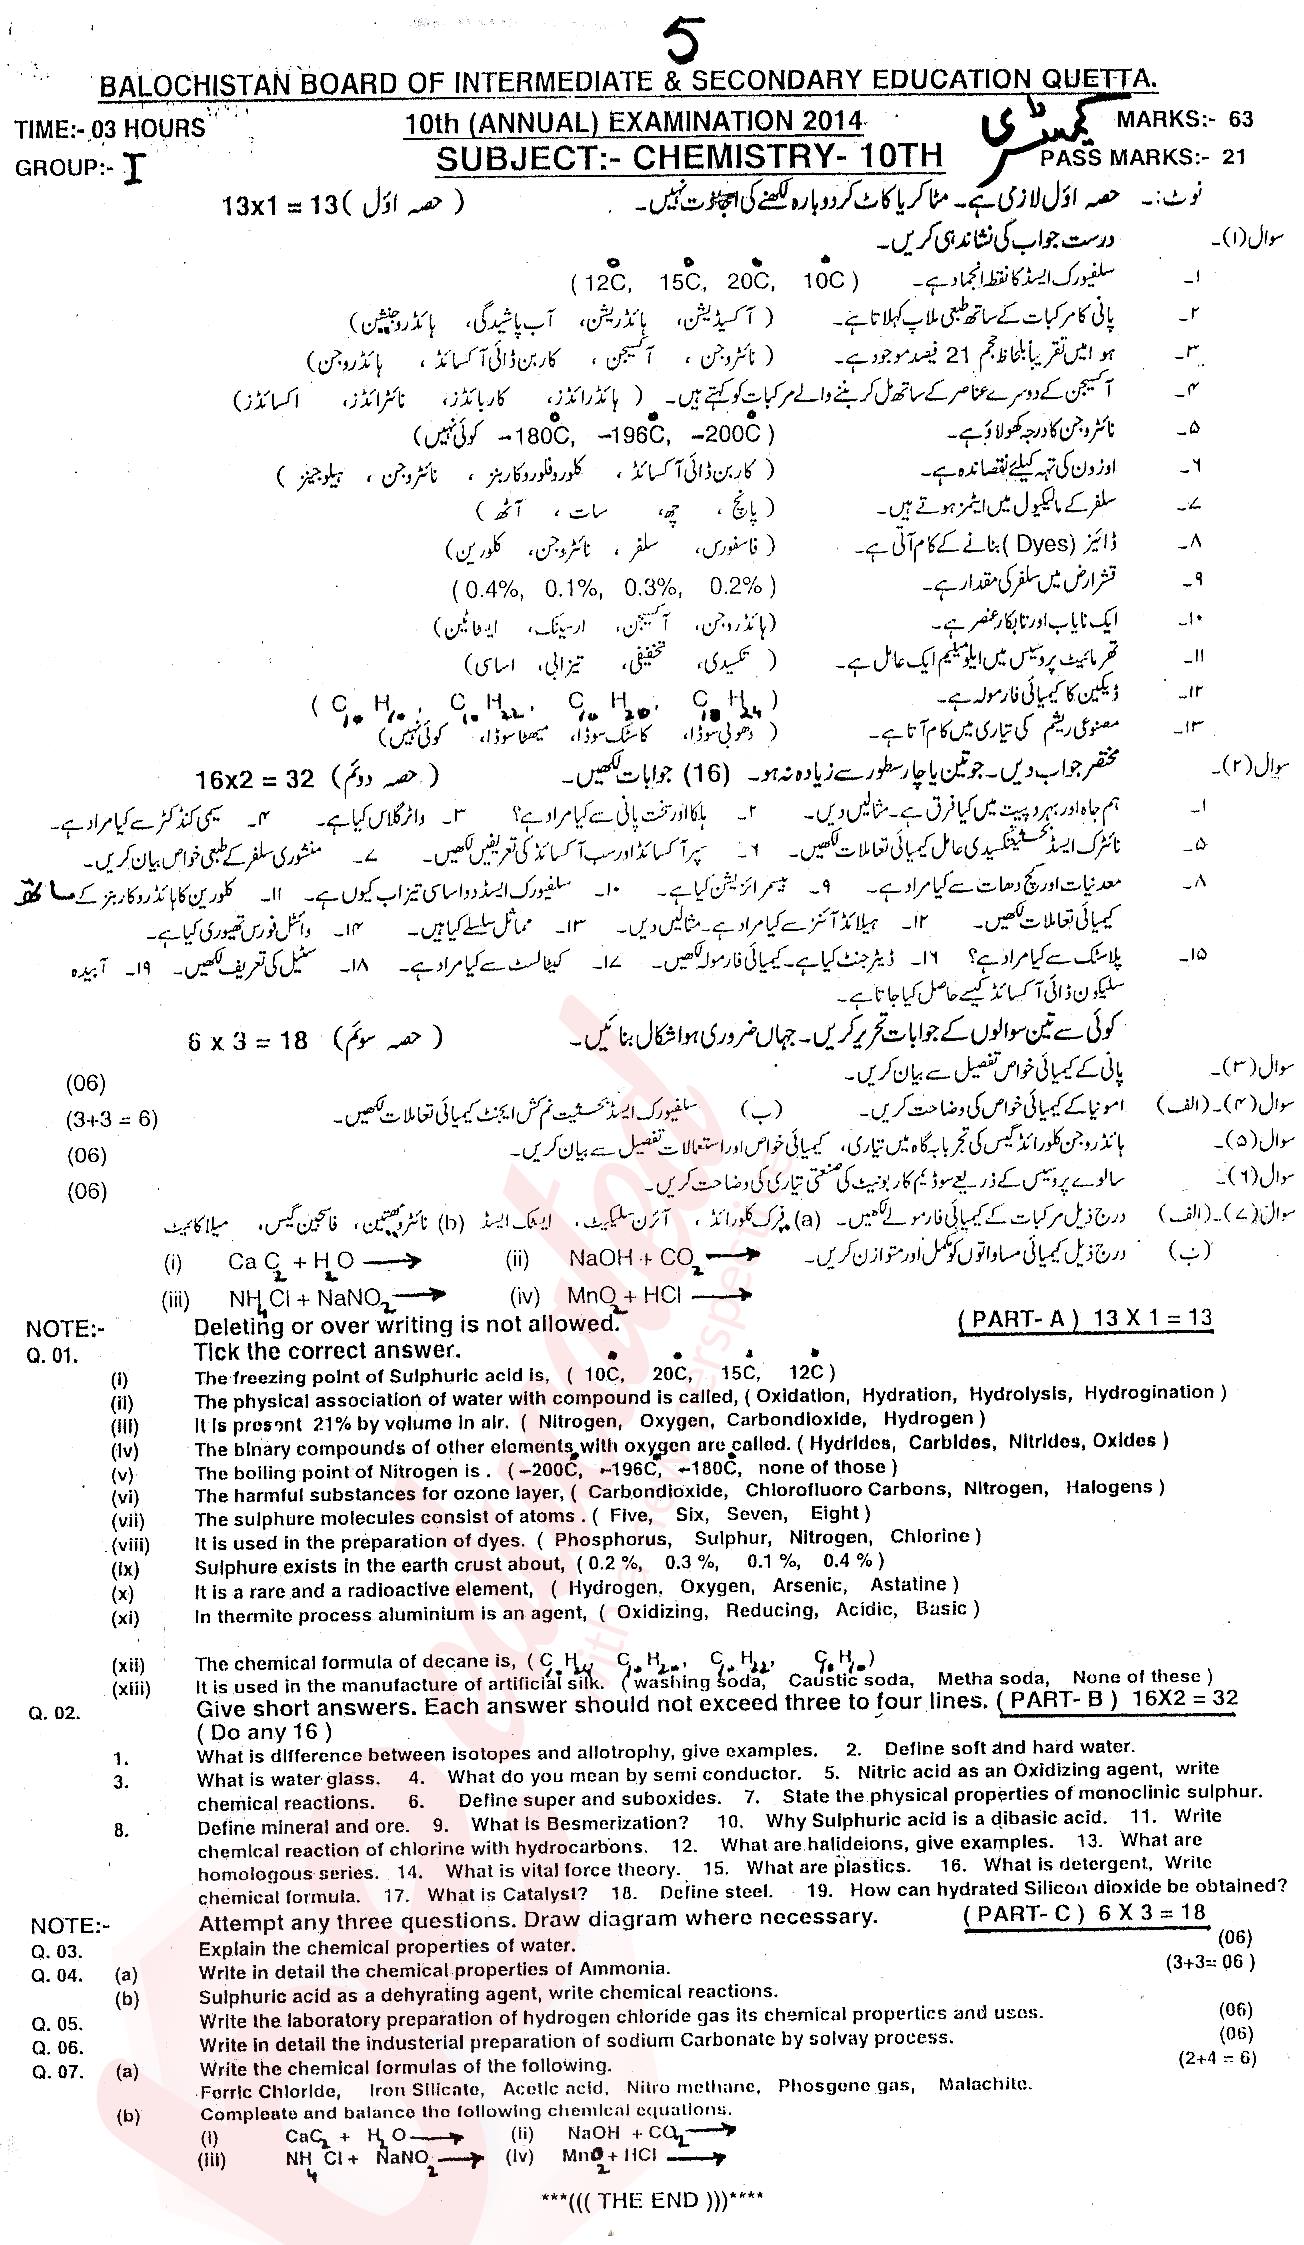 Chemistry 10th class Past Paper Group 1 BISE Quetta 2014